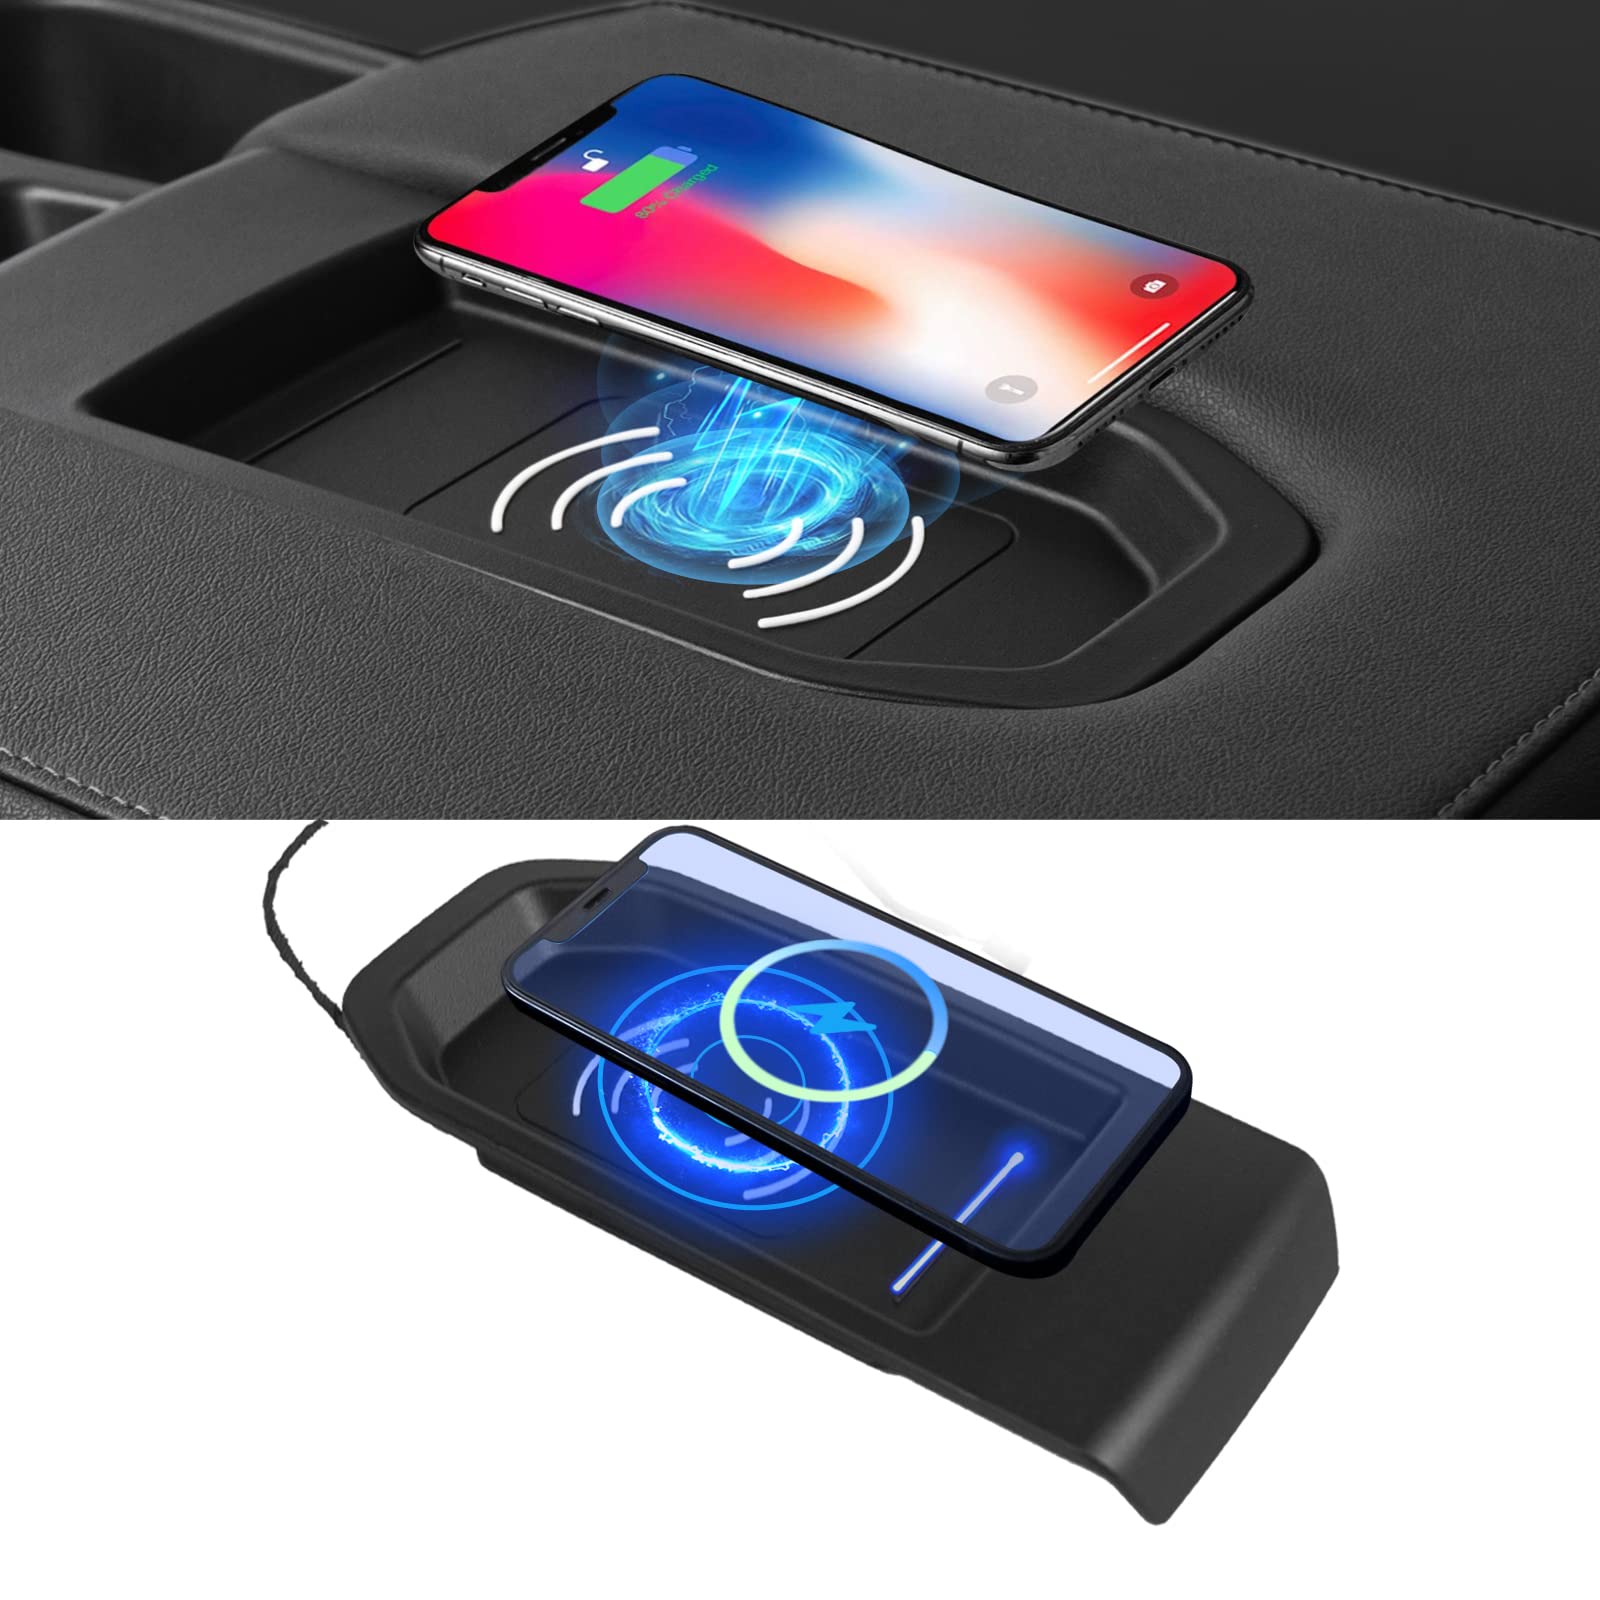 Chevy’s Wireless Charging Compatibility: A List Of Supported Phones